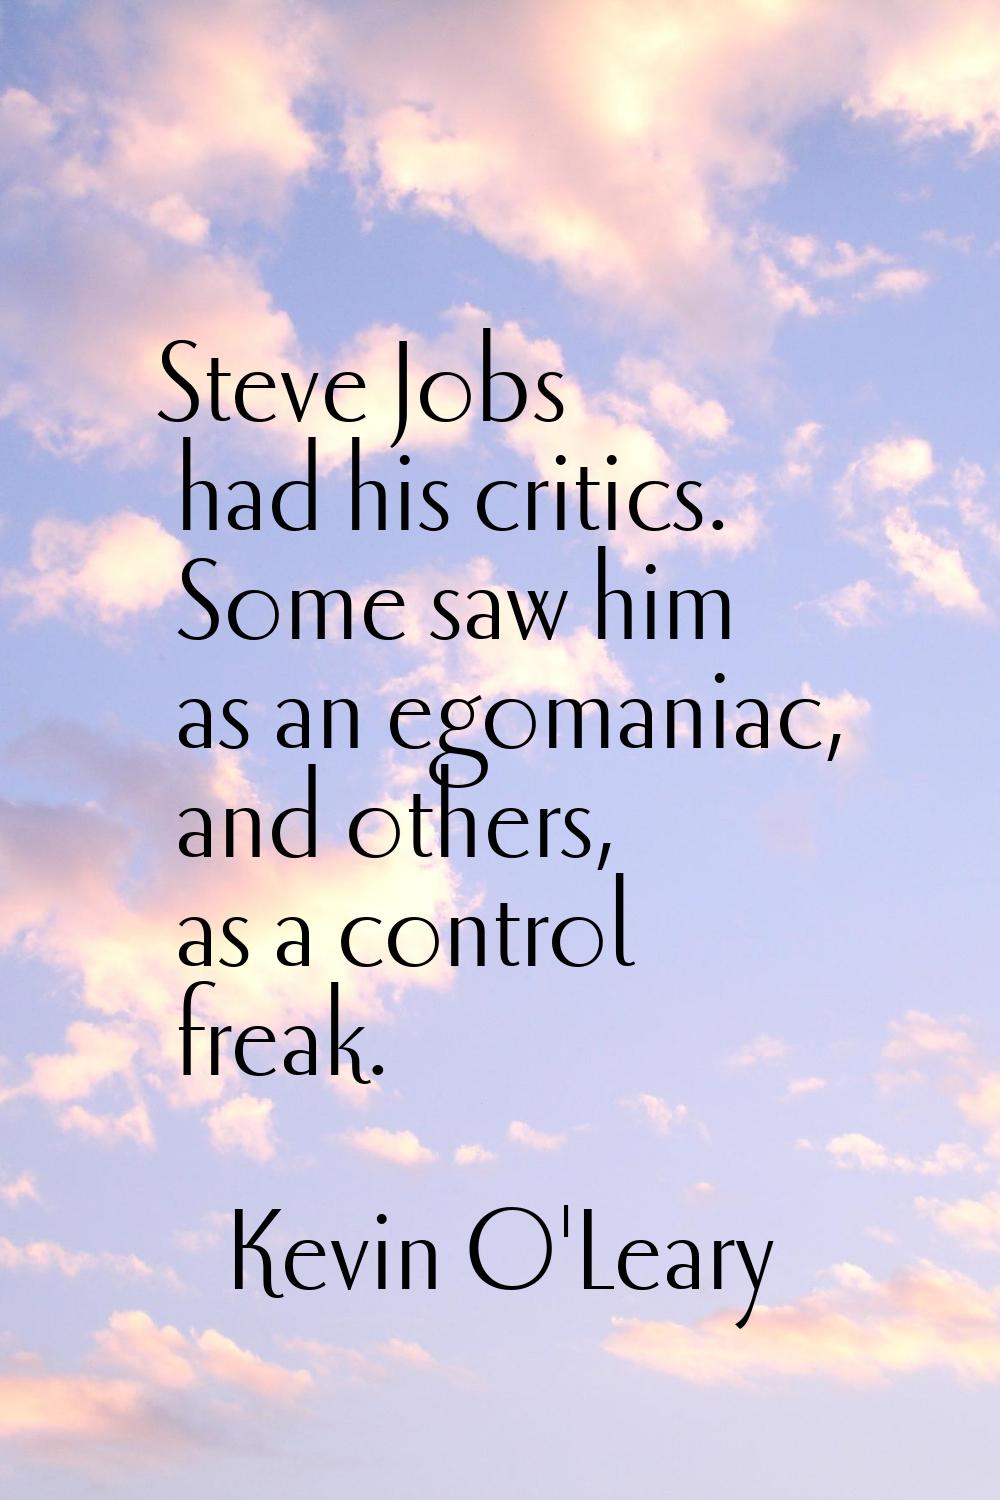 Steve Jobs had his critics. Some saw him as an egomaniac, and others, as a control freak.